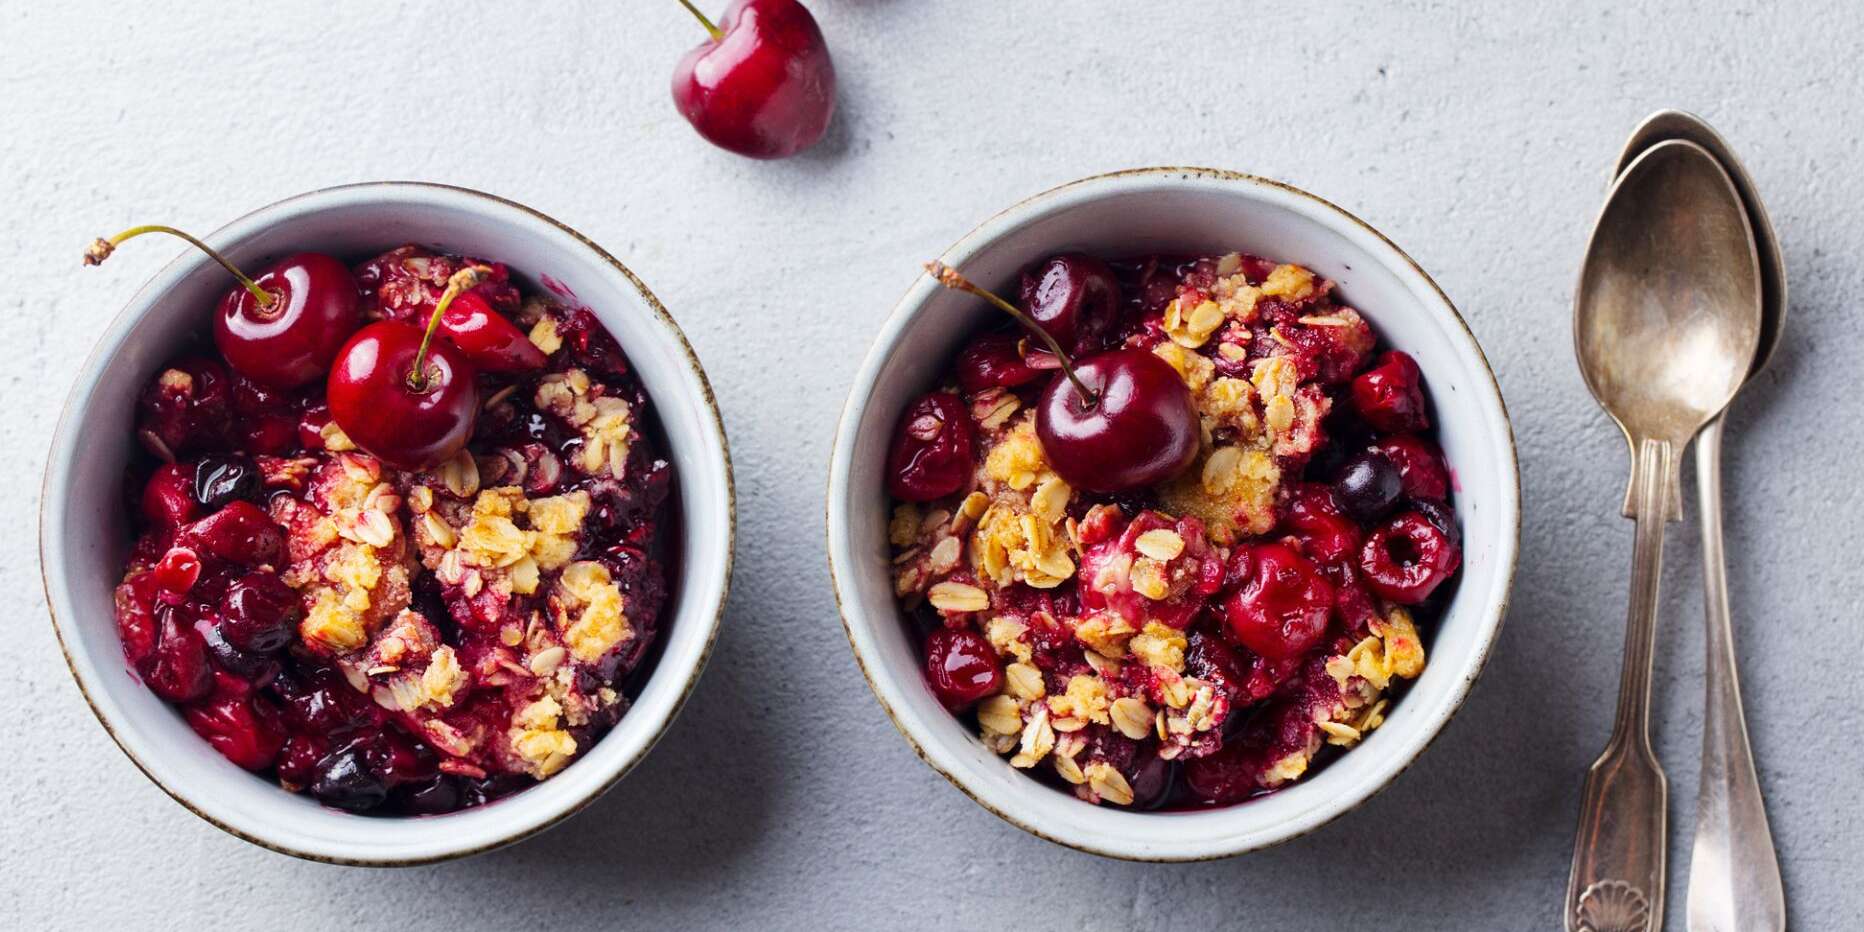 This Make-Ahead Breakfast Fruit Crisp Is My New Summer Go-To